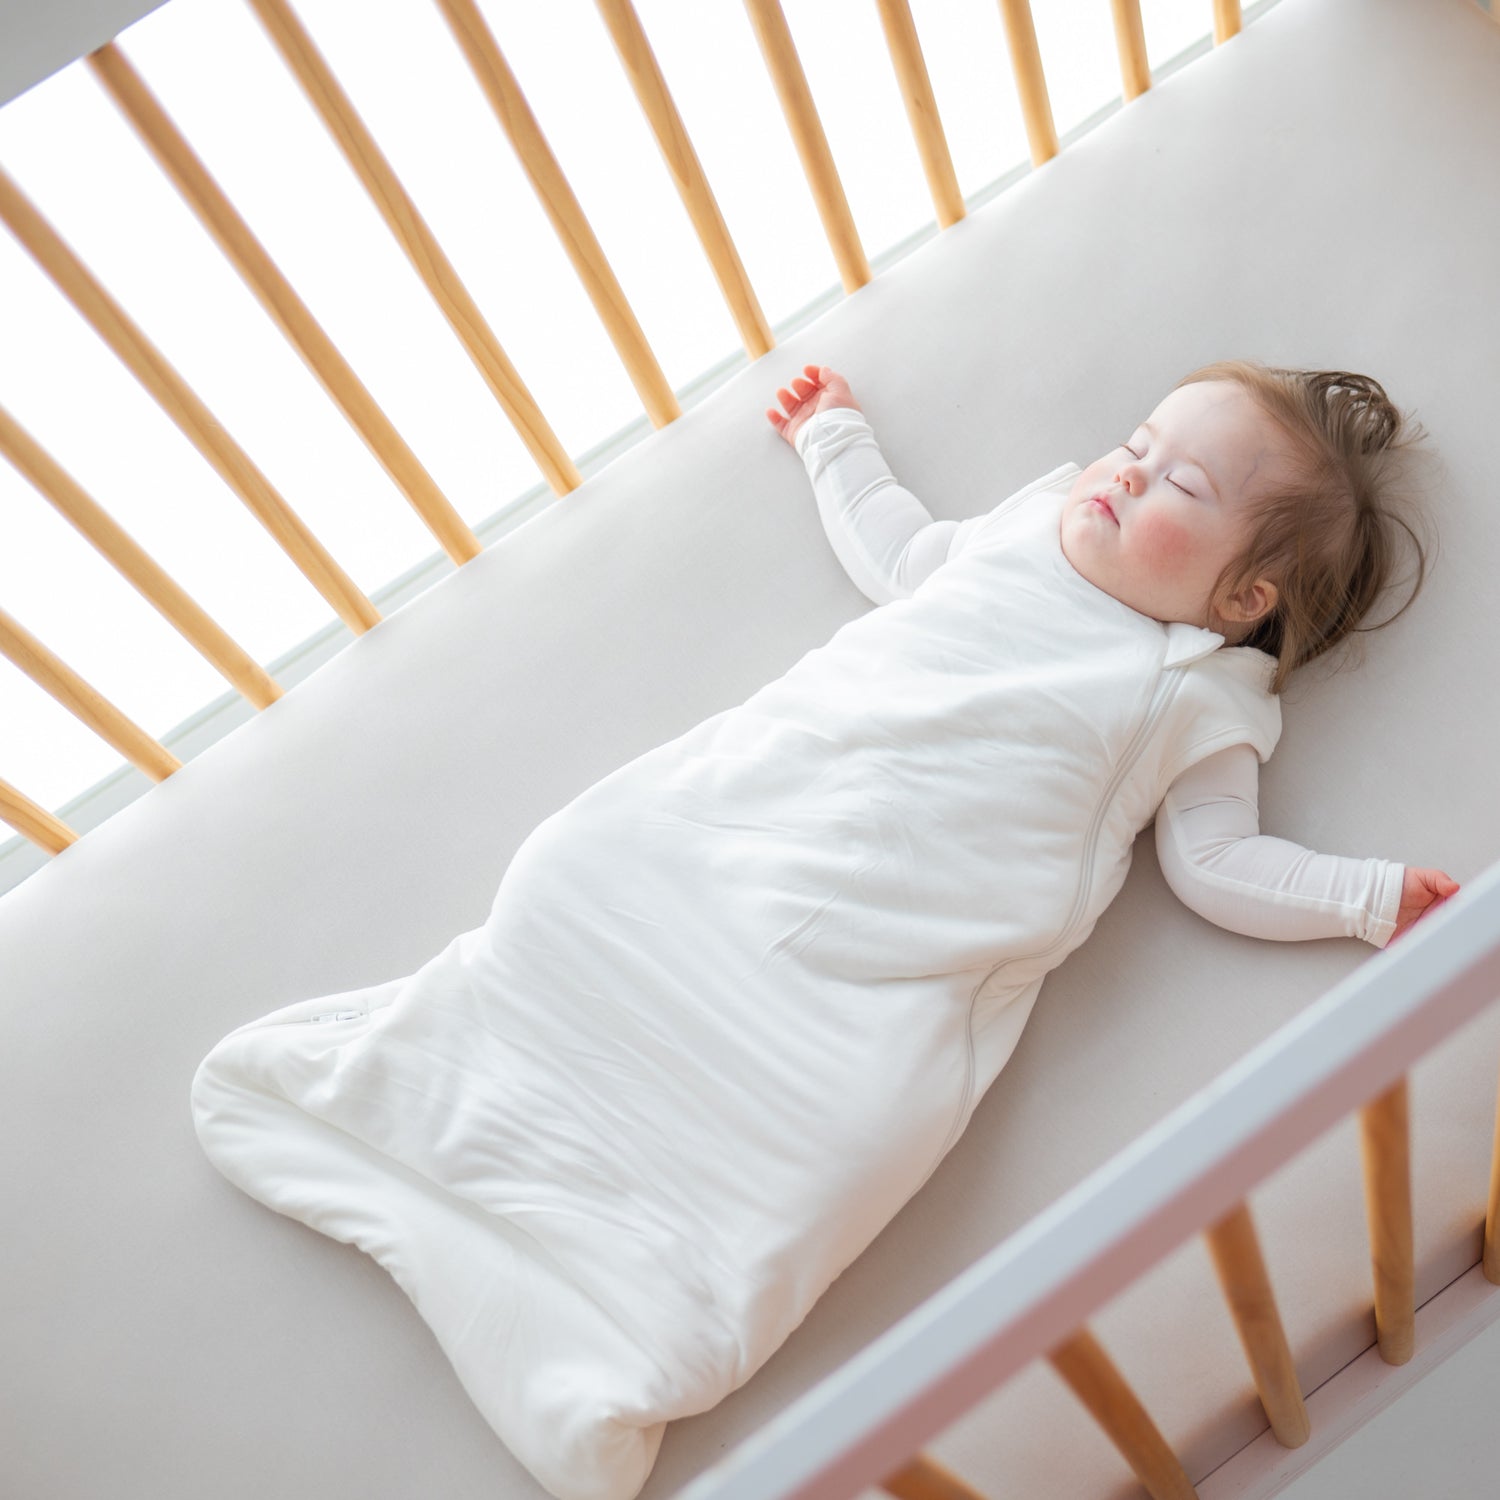 What Should My Baby Wear to Sleep?